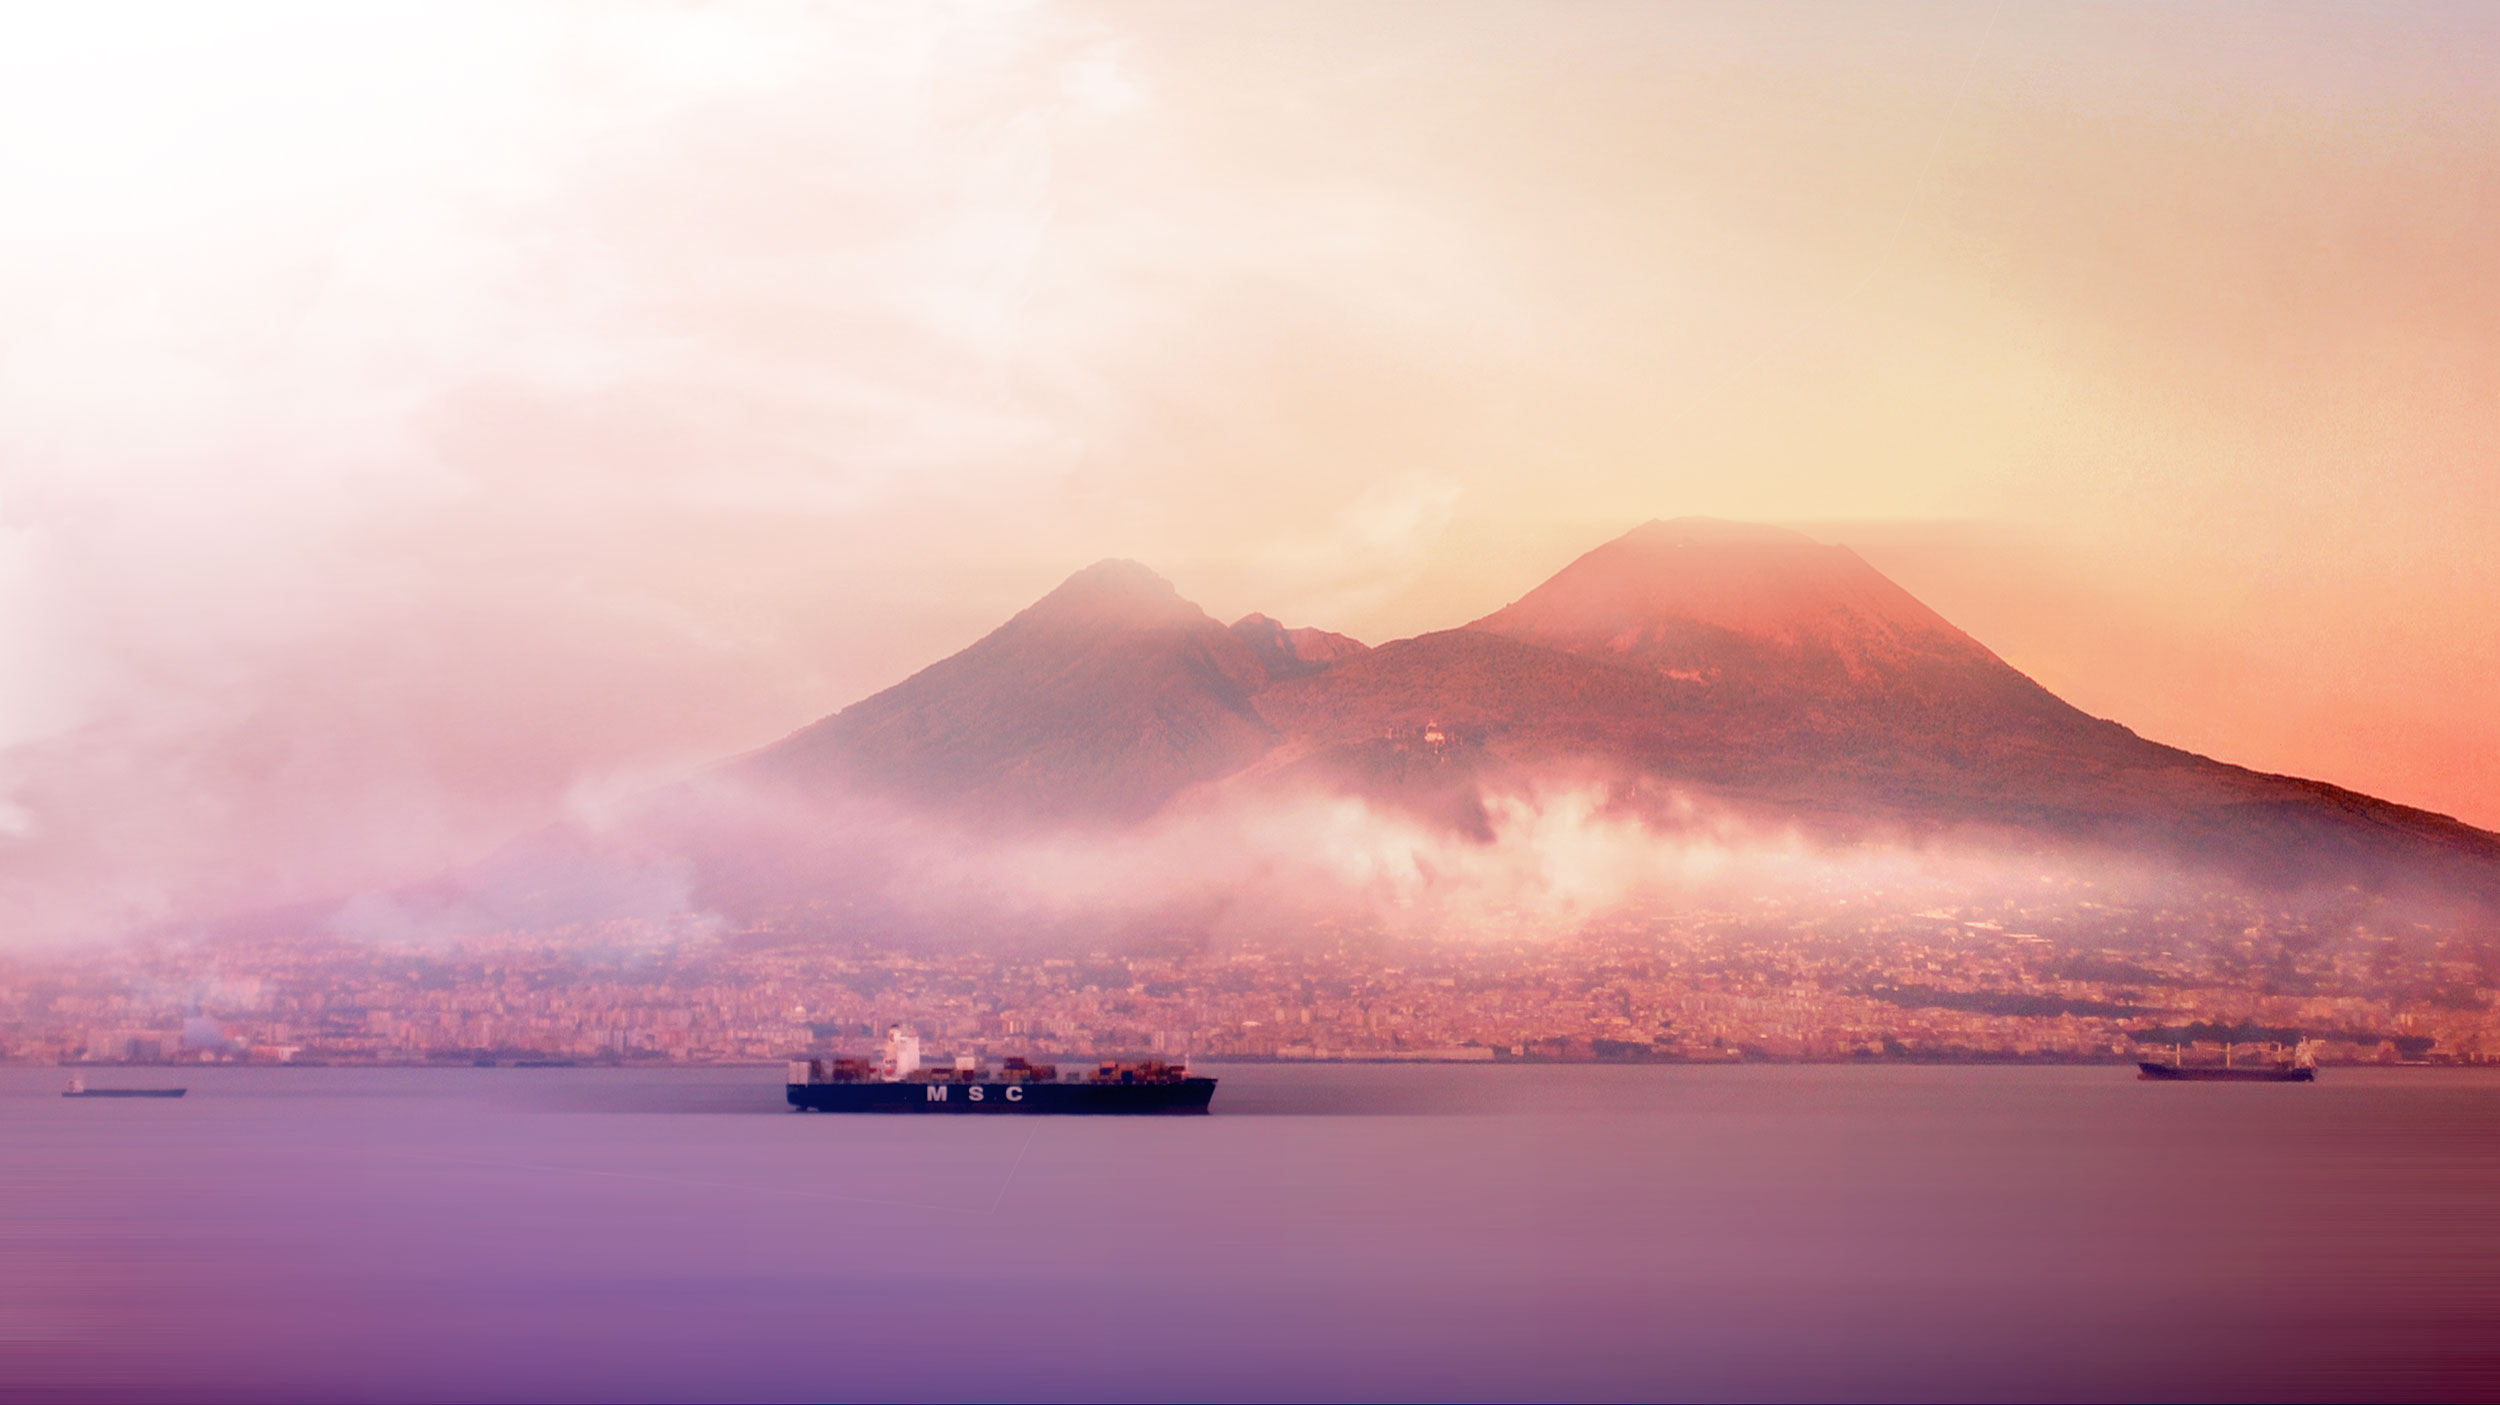 Mount Vesuvius from the bay of Naples by sunset, Naples, Italy, (Nos Dren).